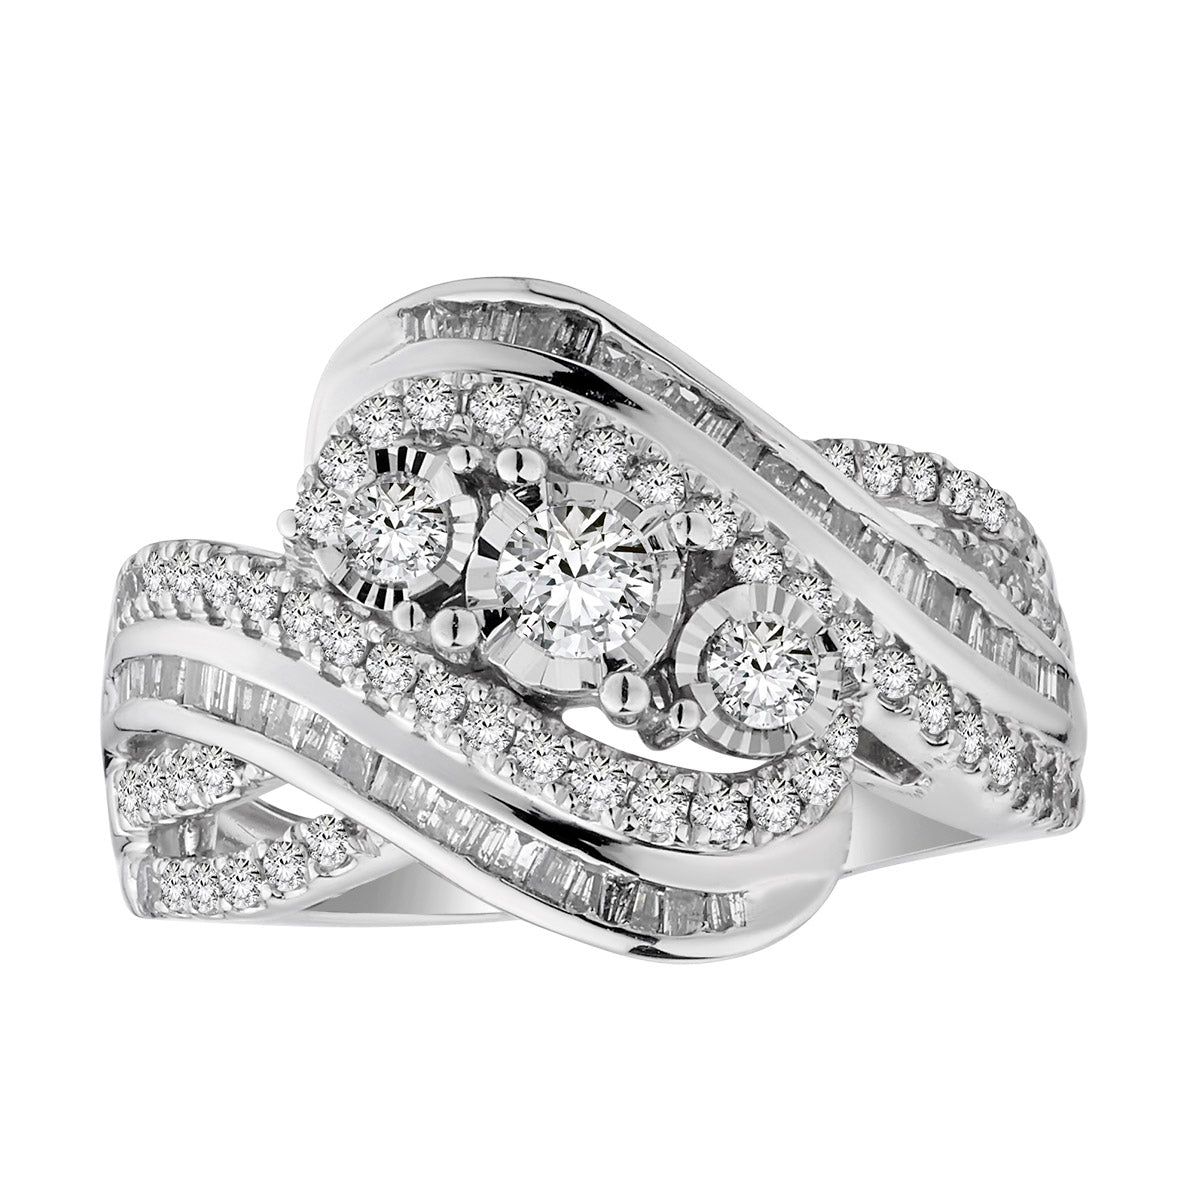 1.00 Carat of Diamonds "Past, Present, Future" Ring, 10kt White Gold......................NOW